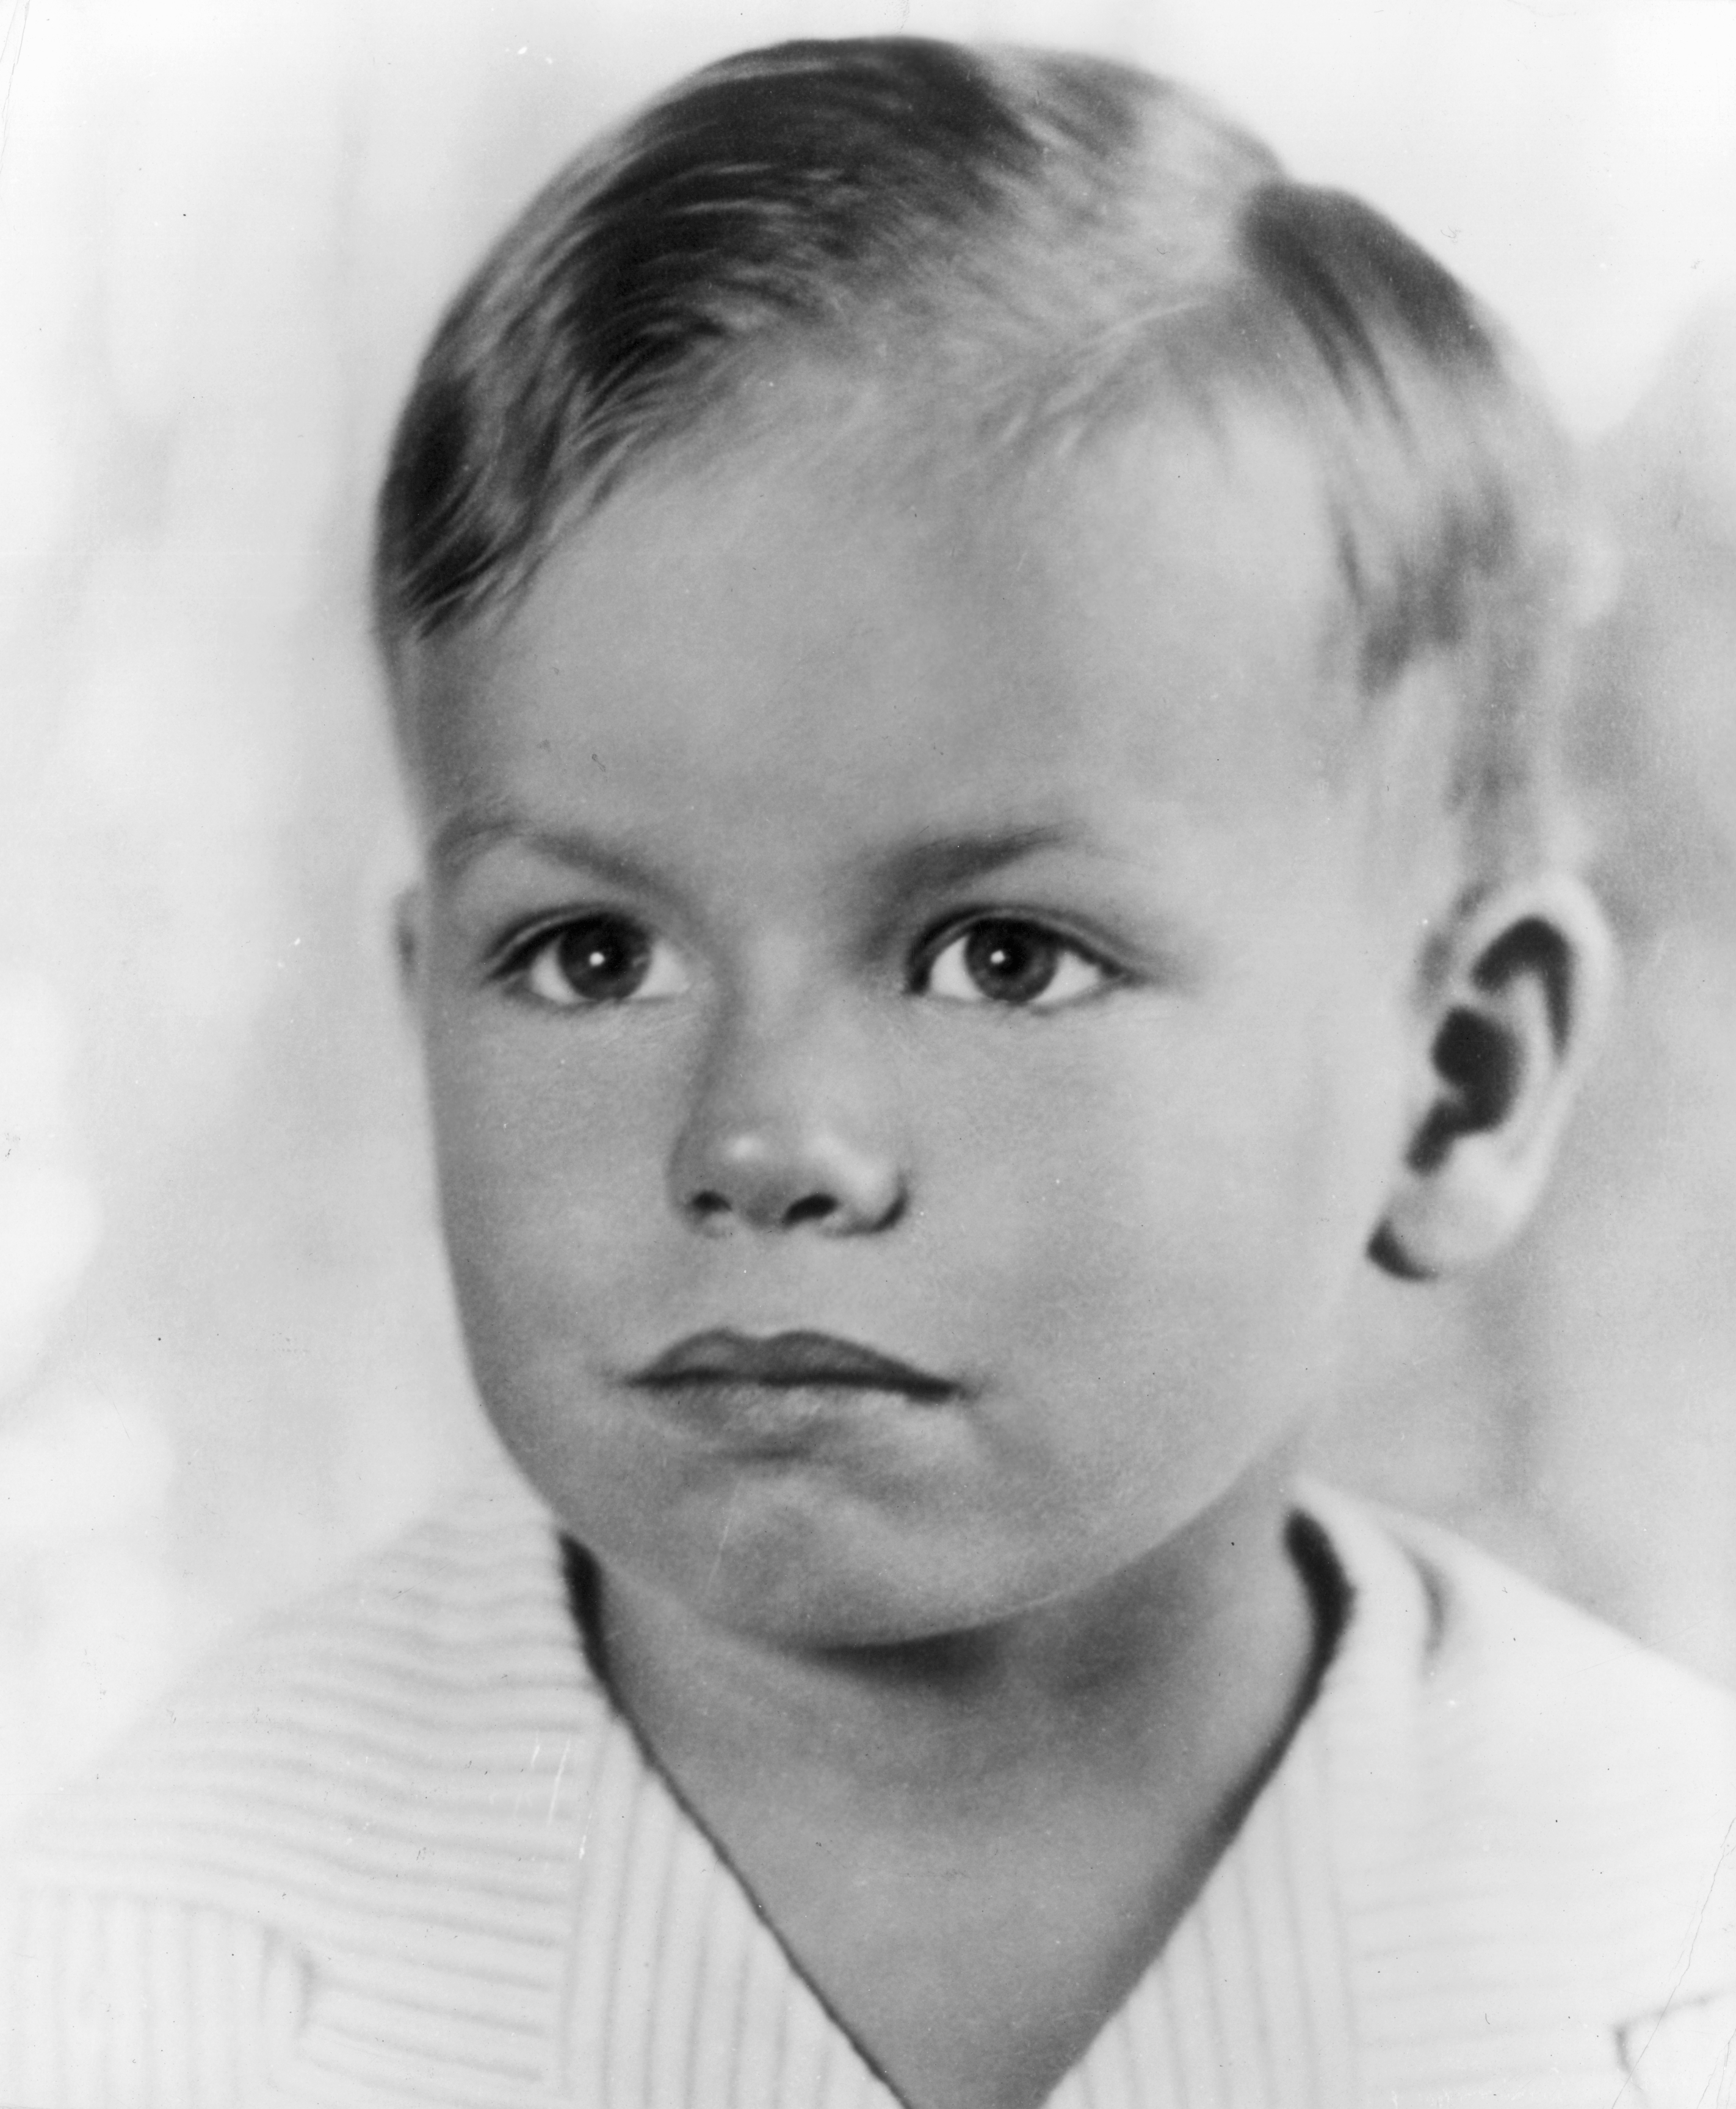 1934: Headshot portrait of American actor Robert Wagner as a toddler | Source: Getty Images